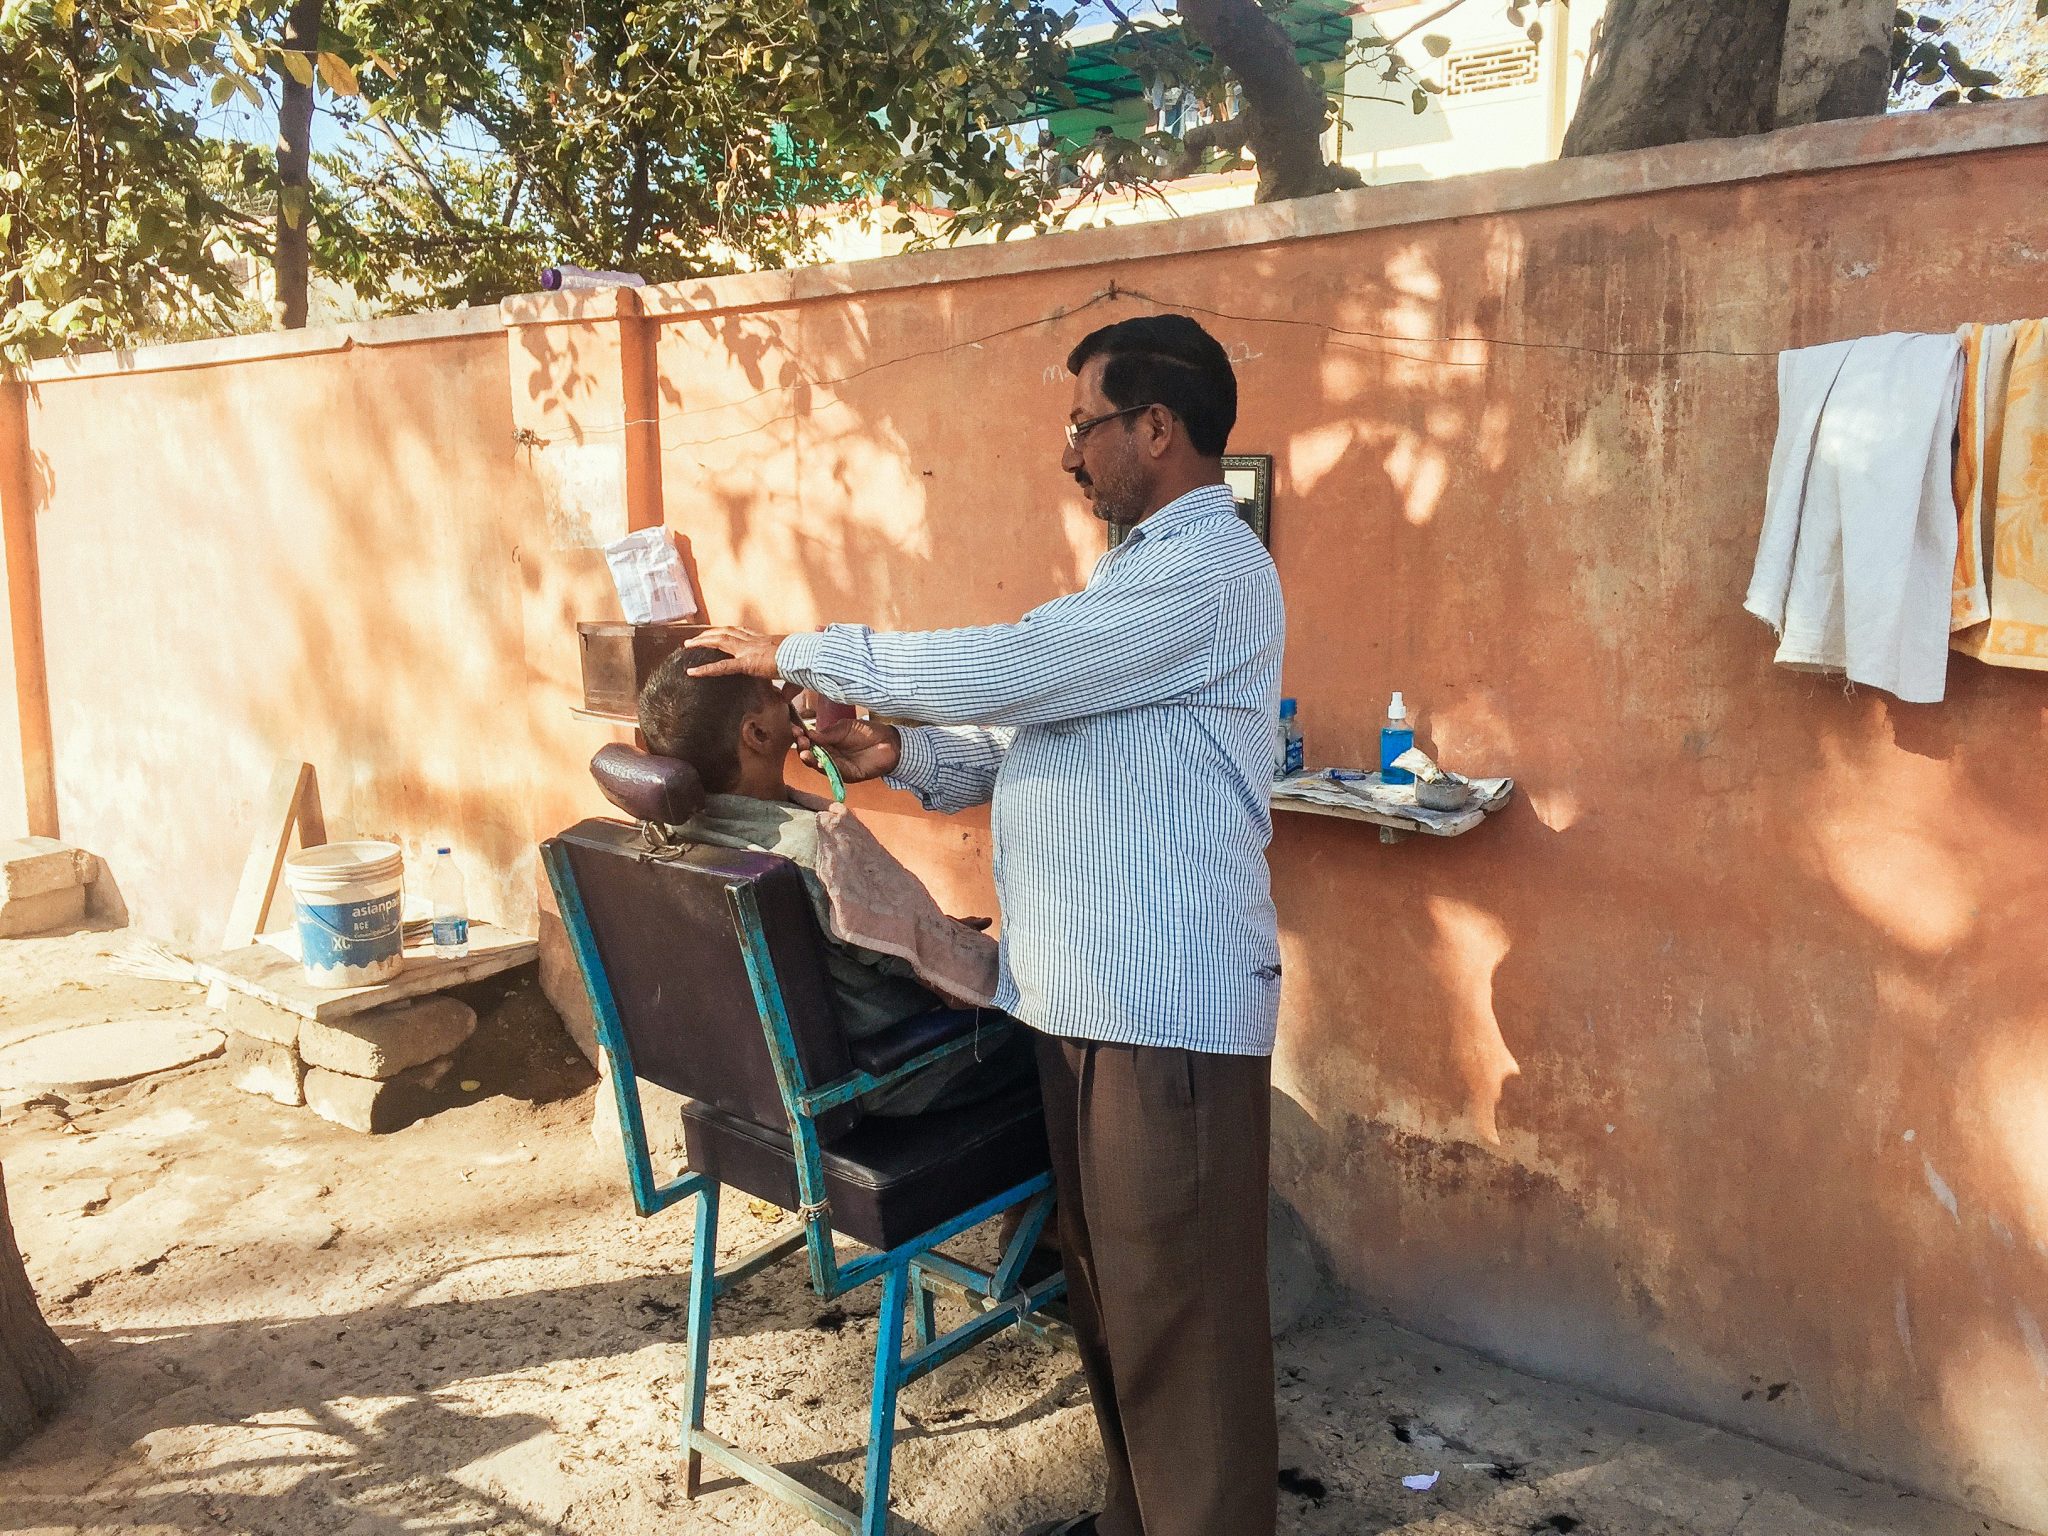 Street barber in Jaipur, Rajasthan | Indian Travel Itinerary